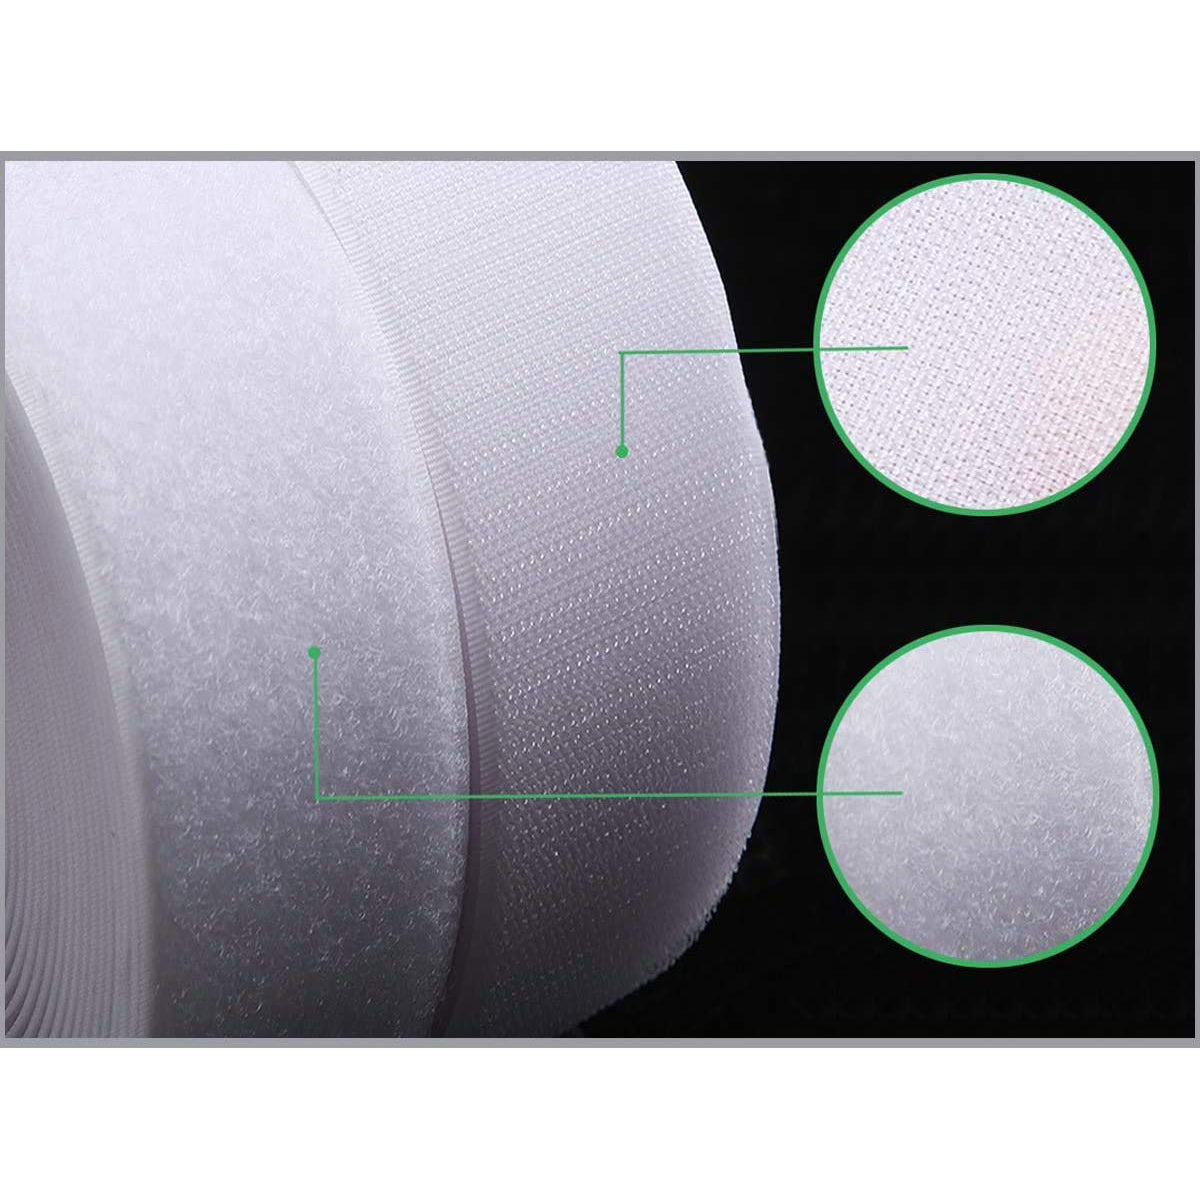 Non Adhesive Hook Tape & Non Adhesive Loop Tape - White Color LifeKrafts